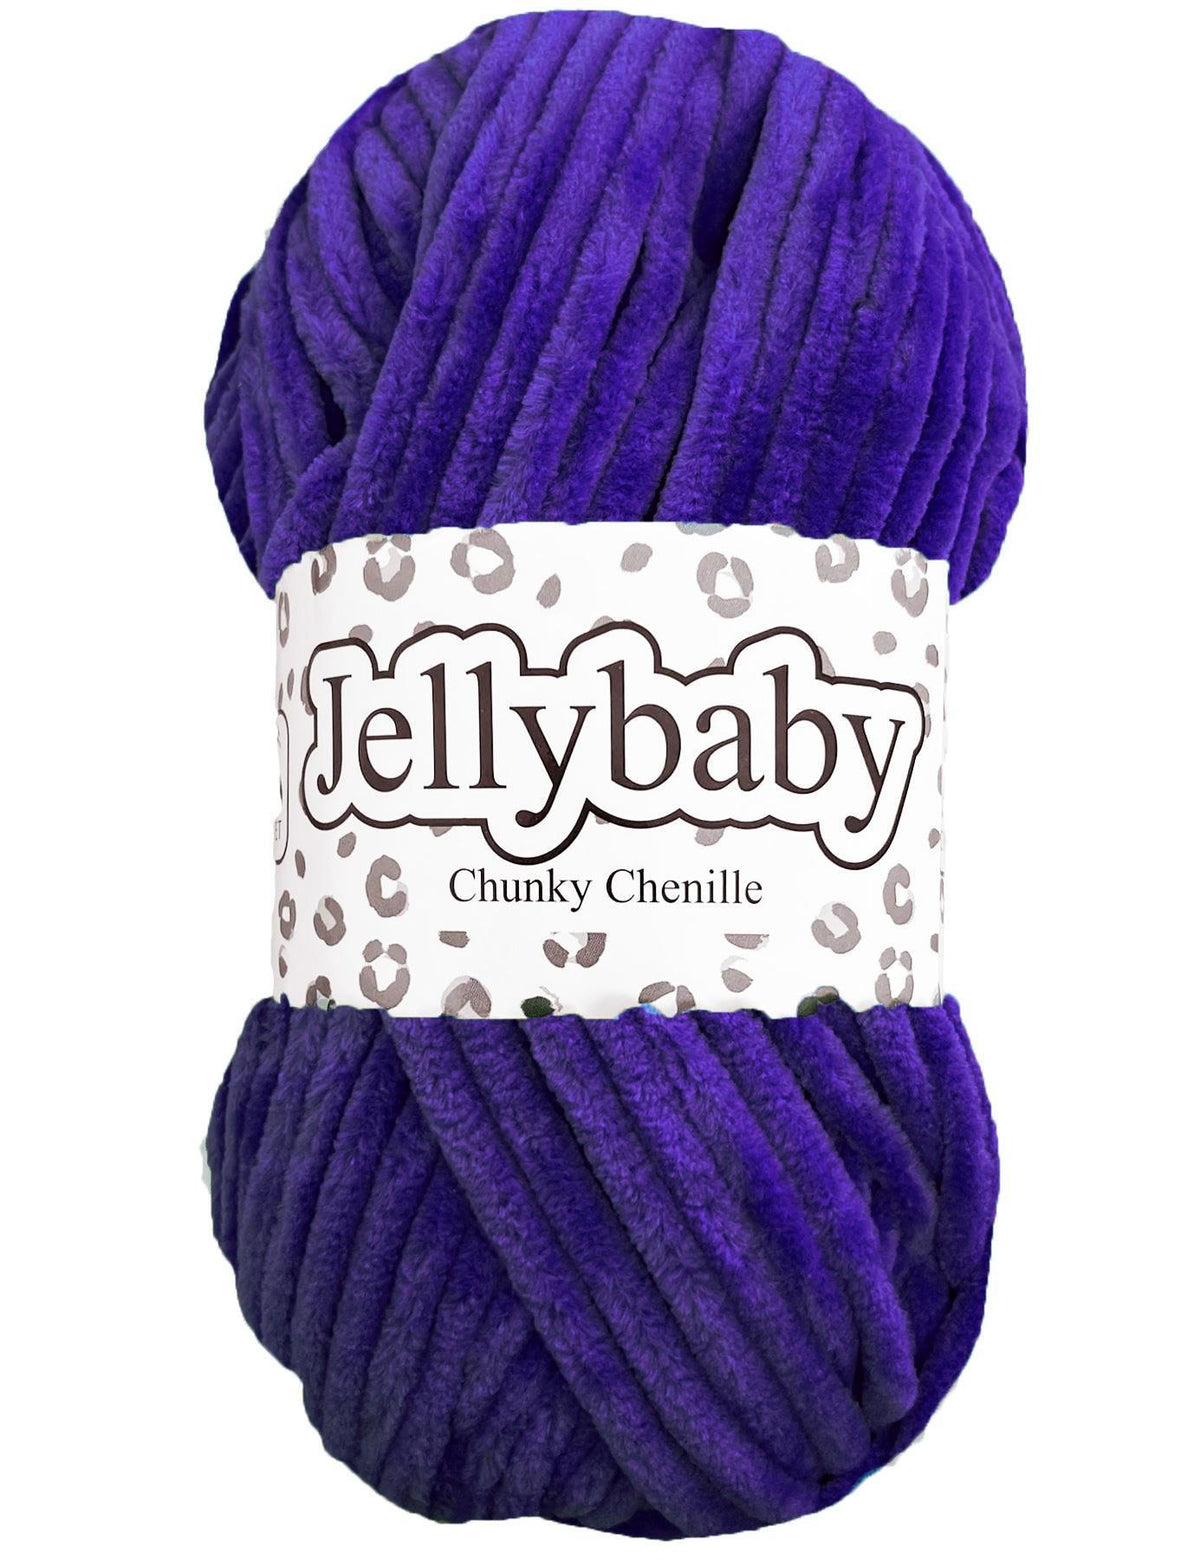 Cygnet Jellybaby Chenille Chunky Imperial (027) -100g